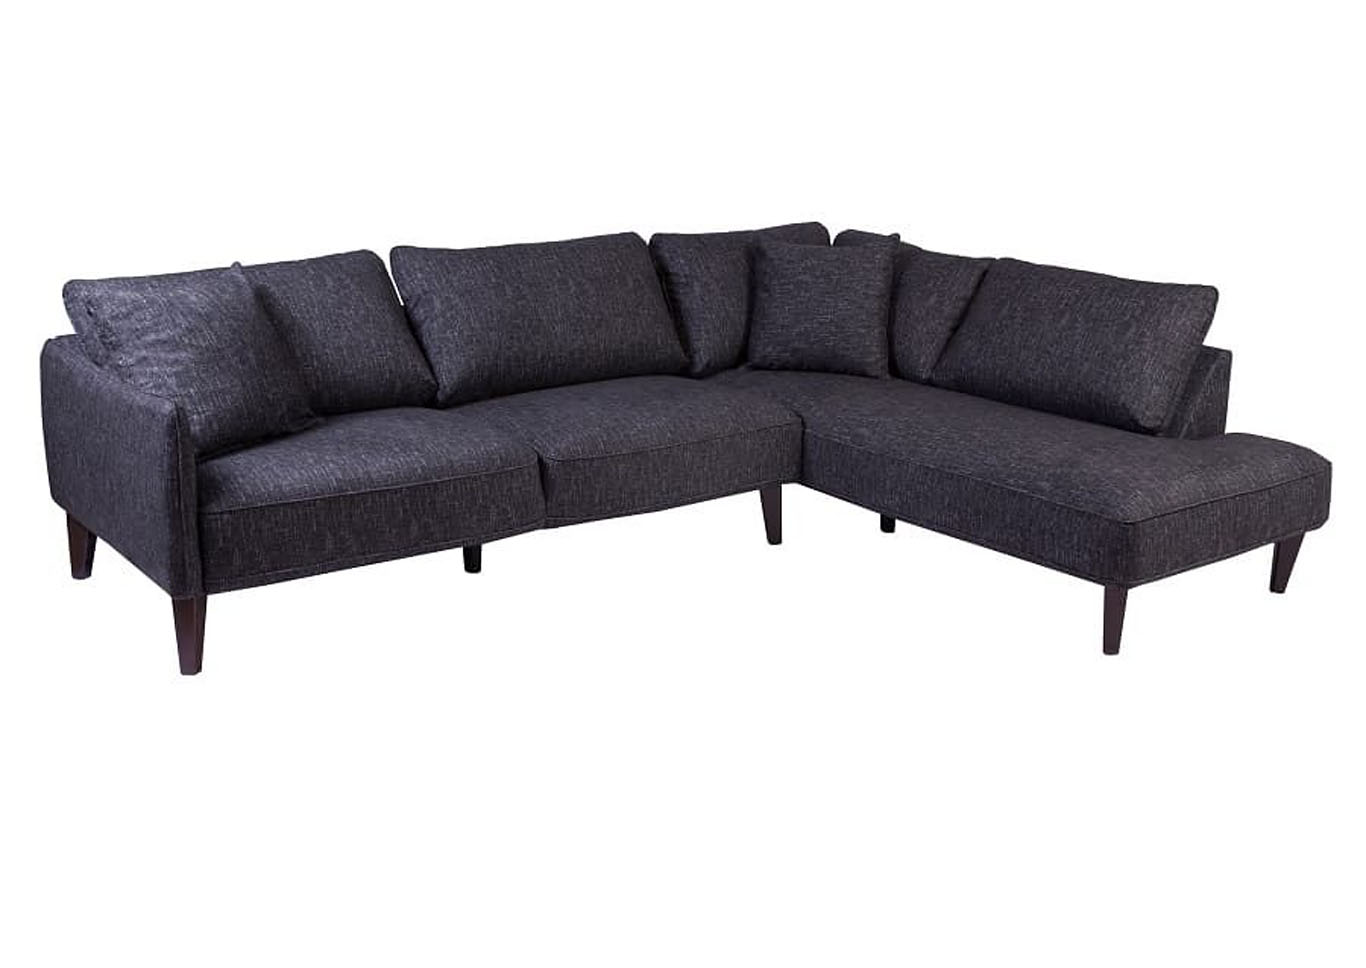 Asher Sofa Chaise,Instore